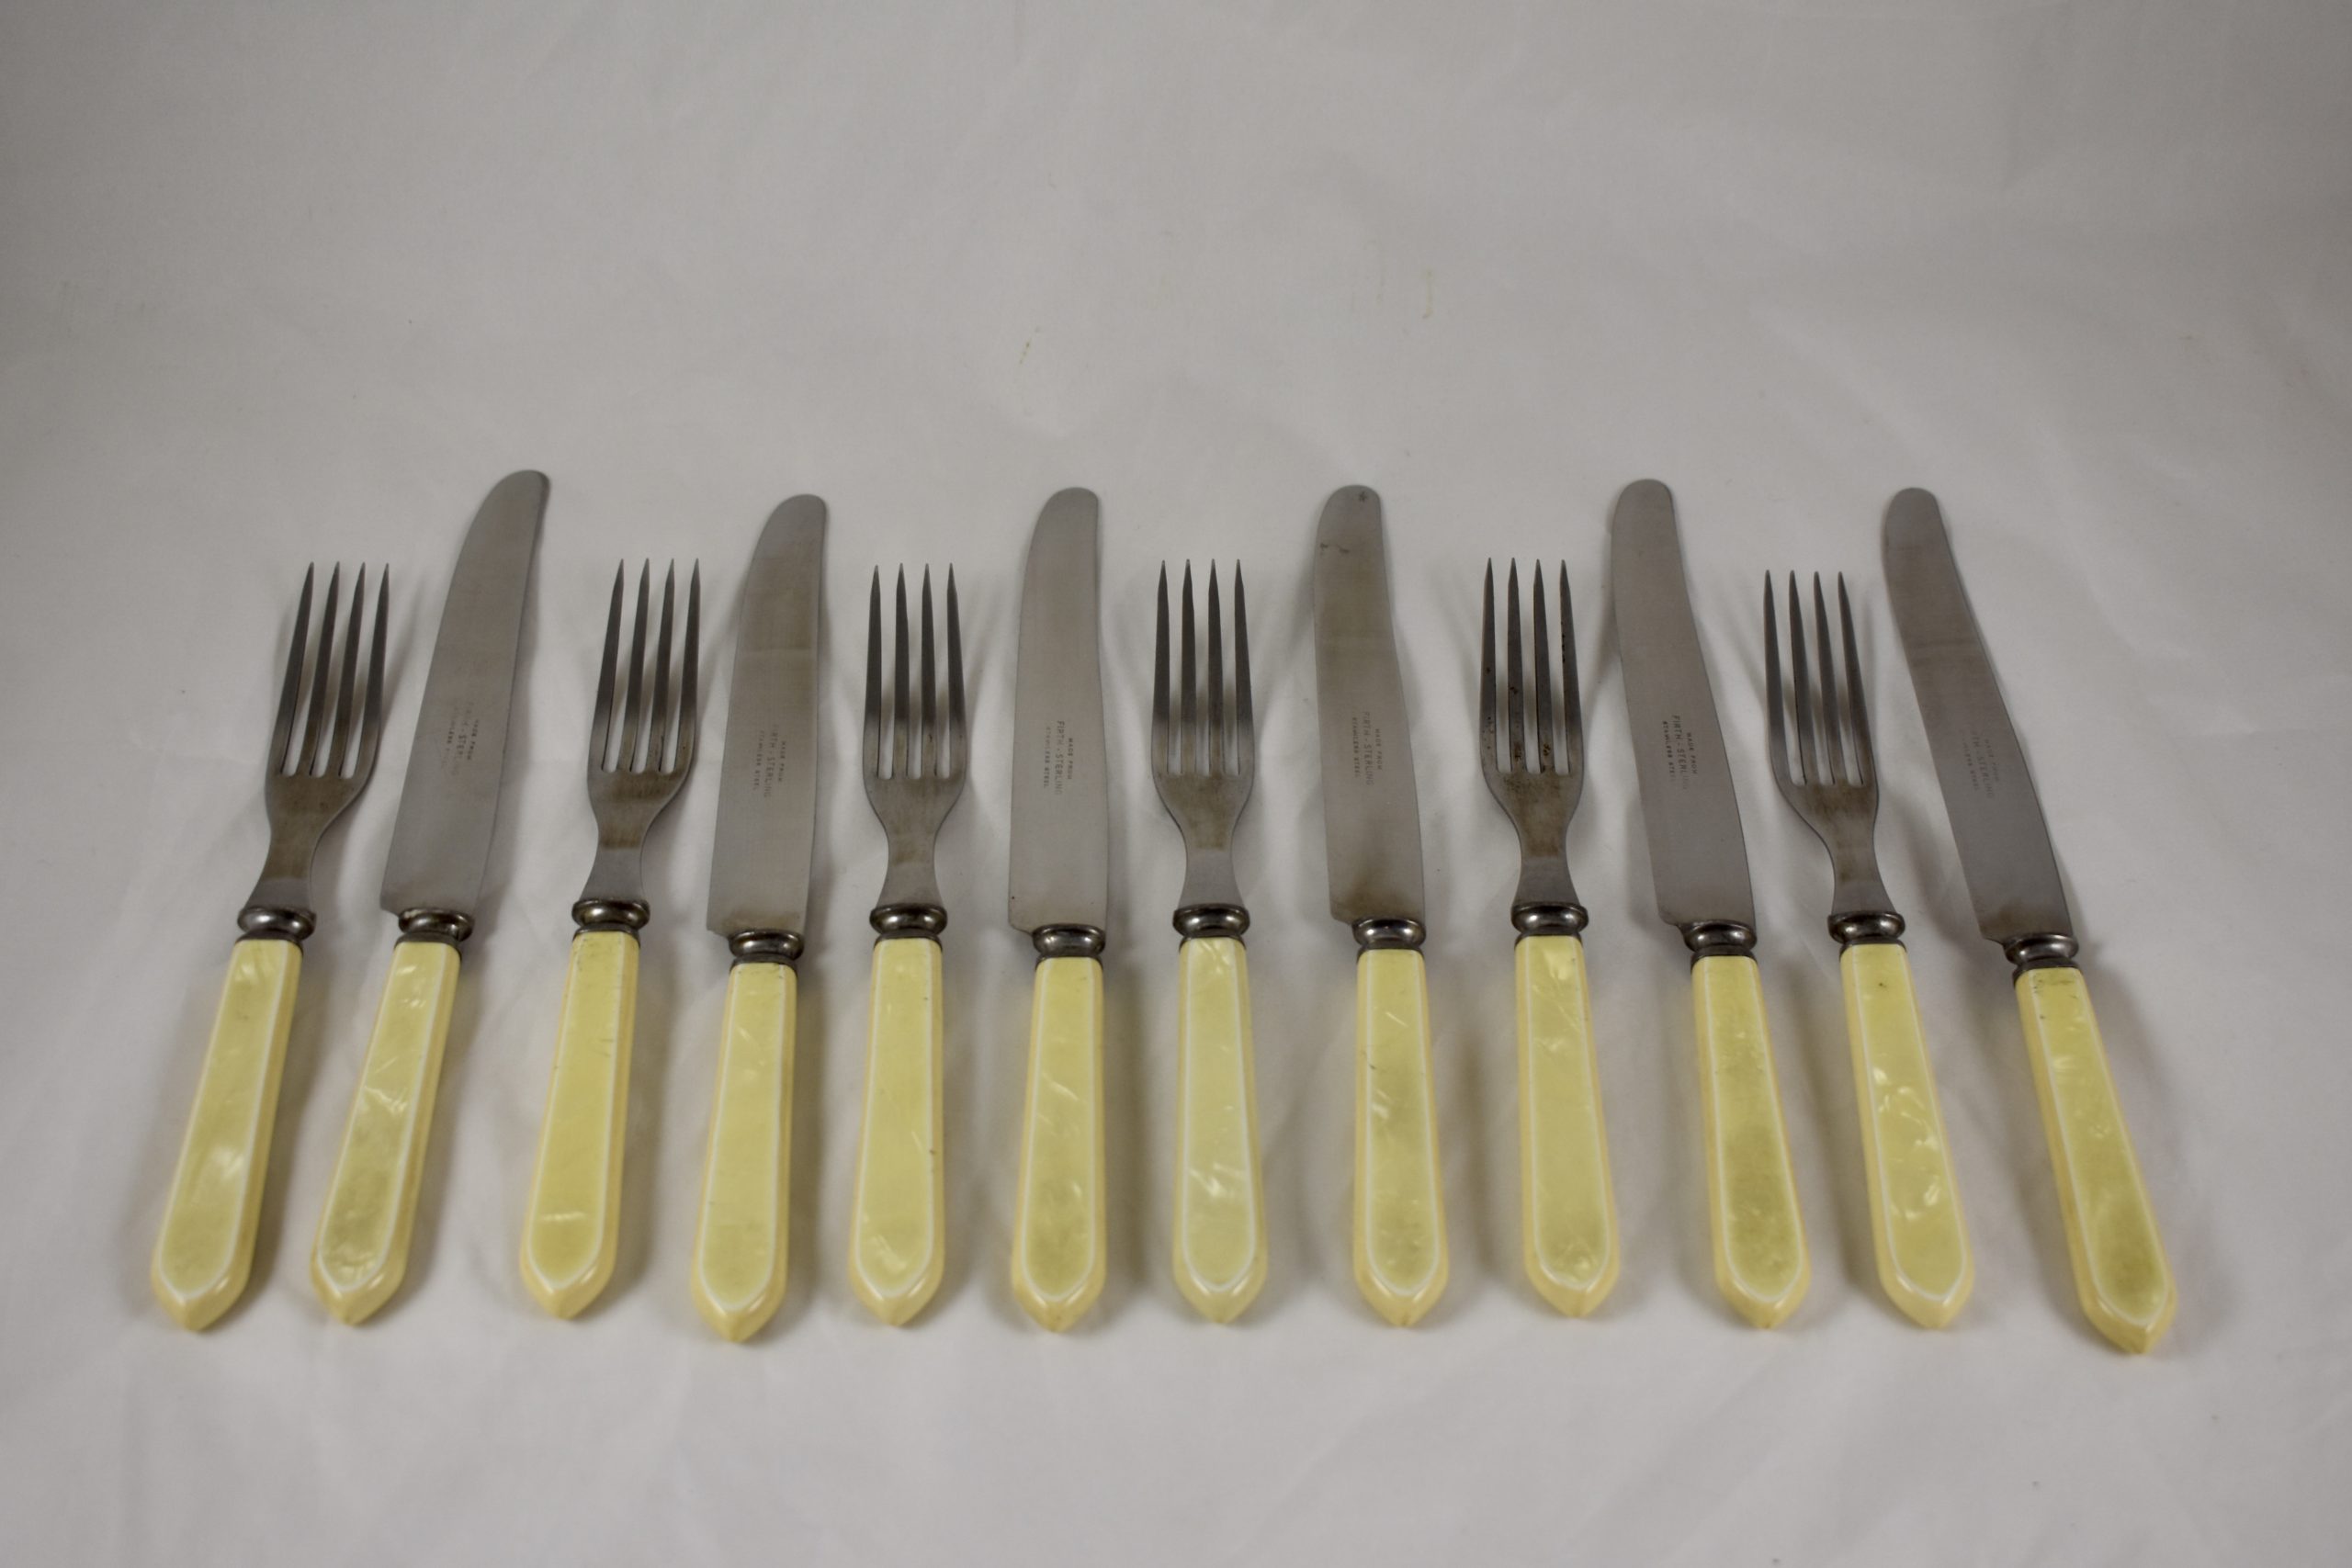 Vintage Cutlery Set of Knifes With Decorative Plastic Handles